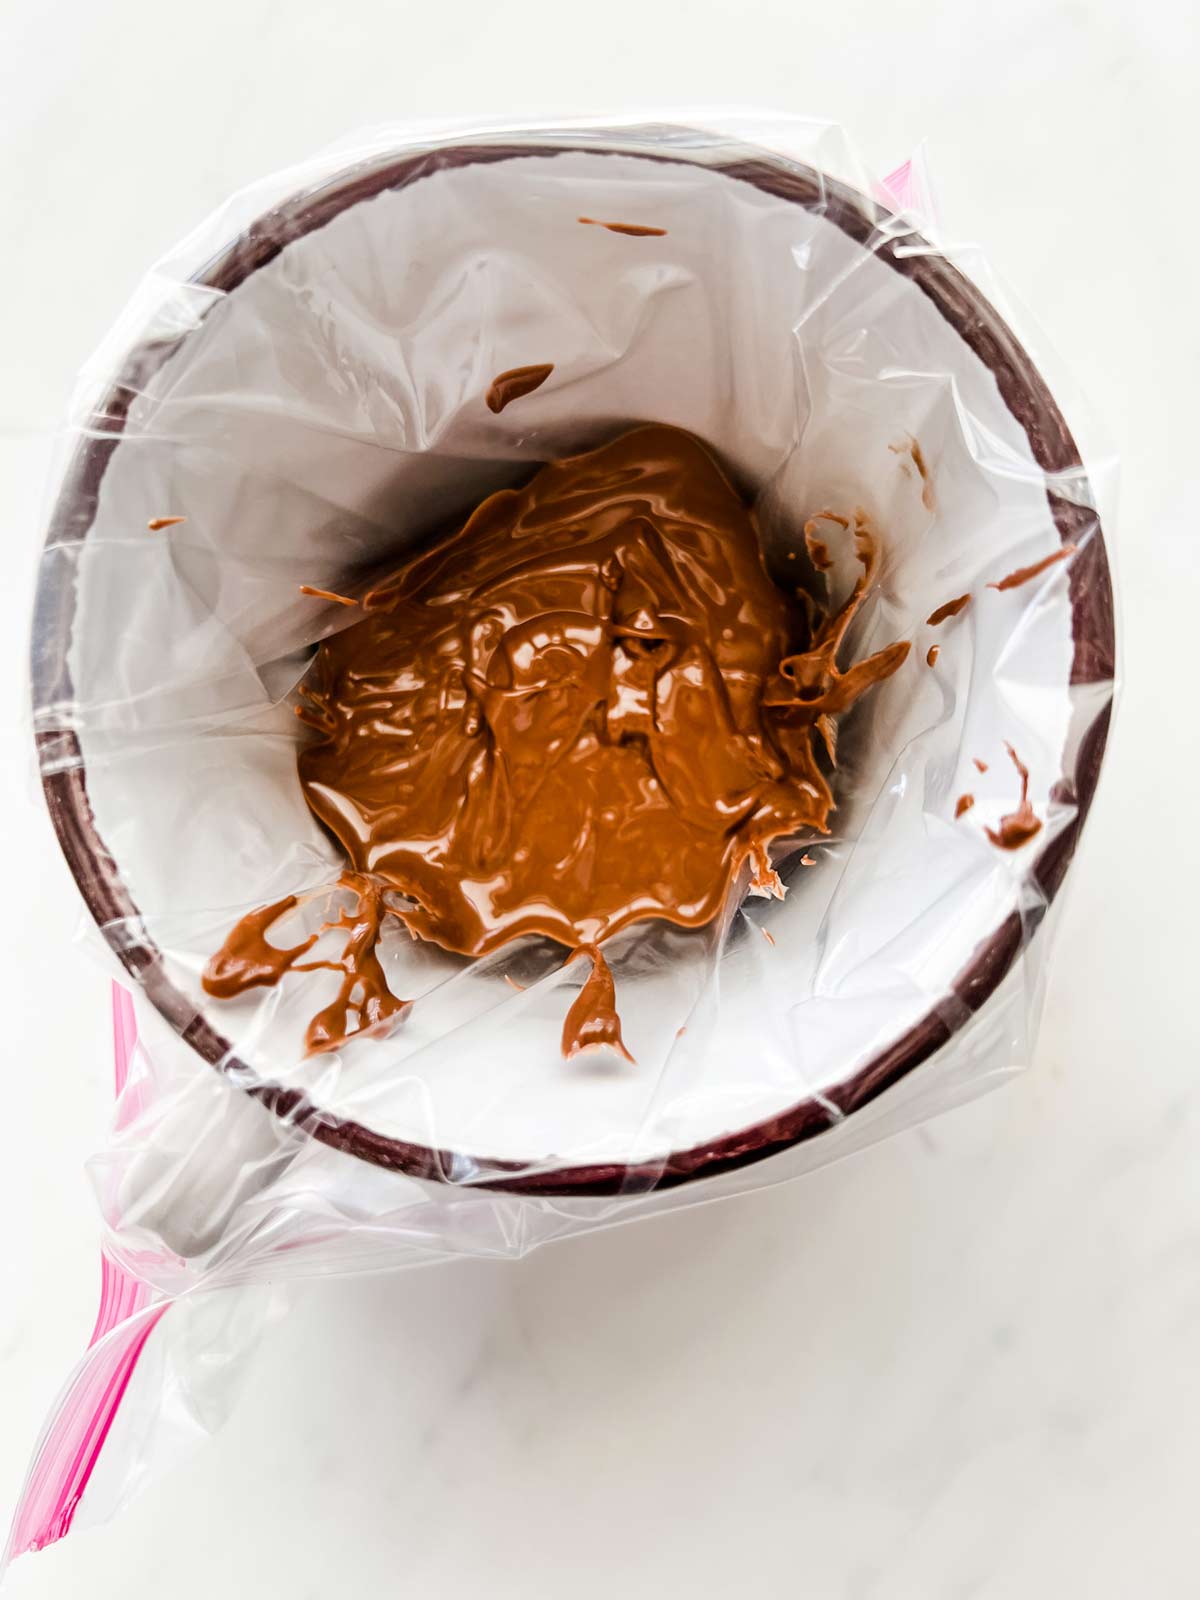 Warmed nutella in a bag ready for piping into cookies.